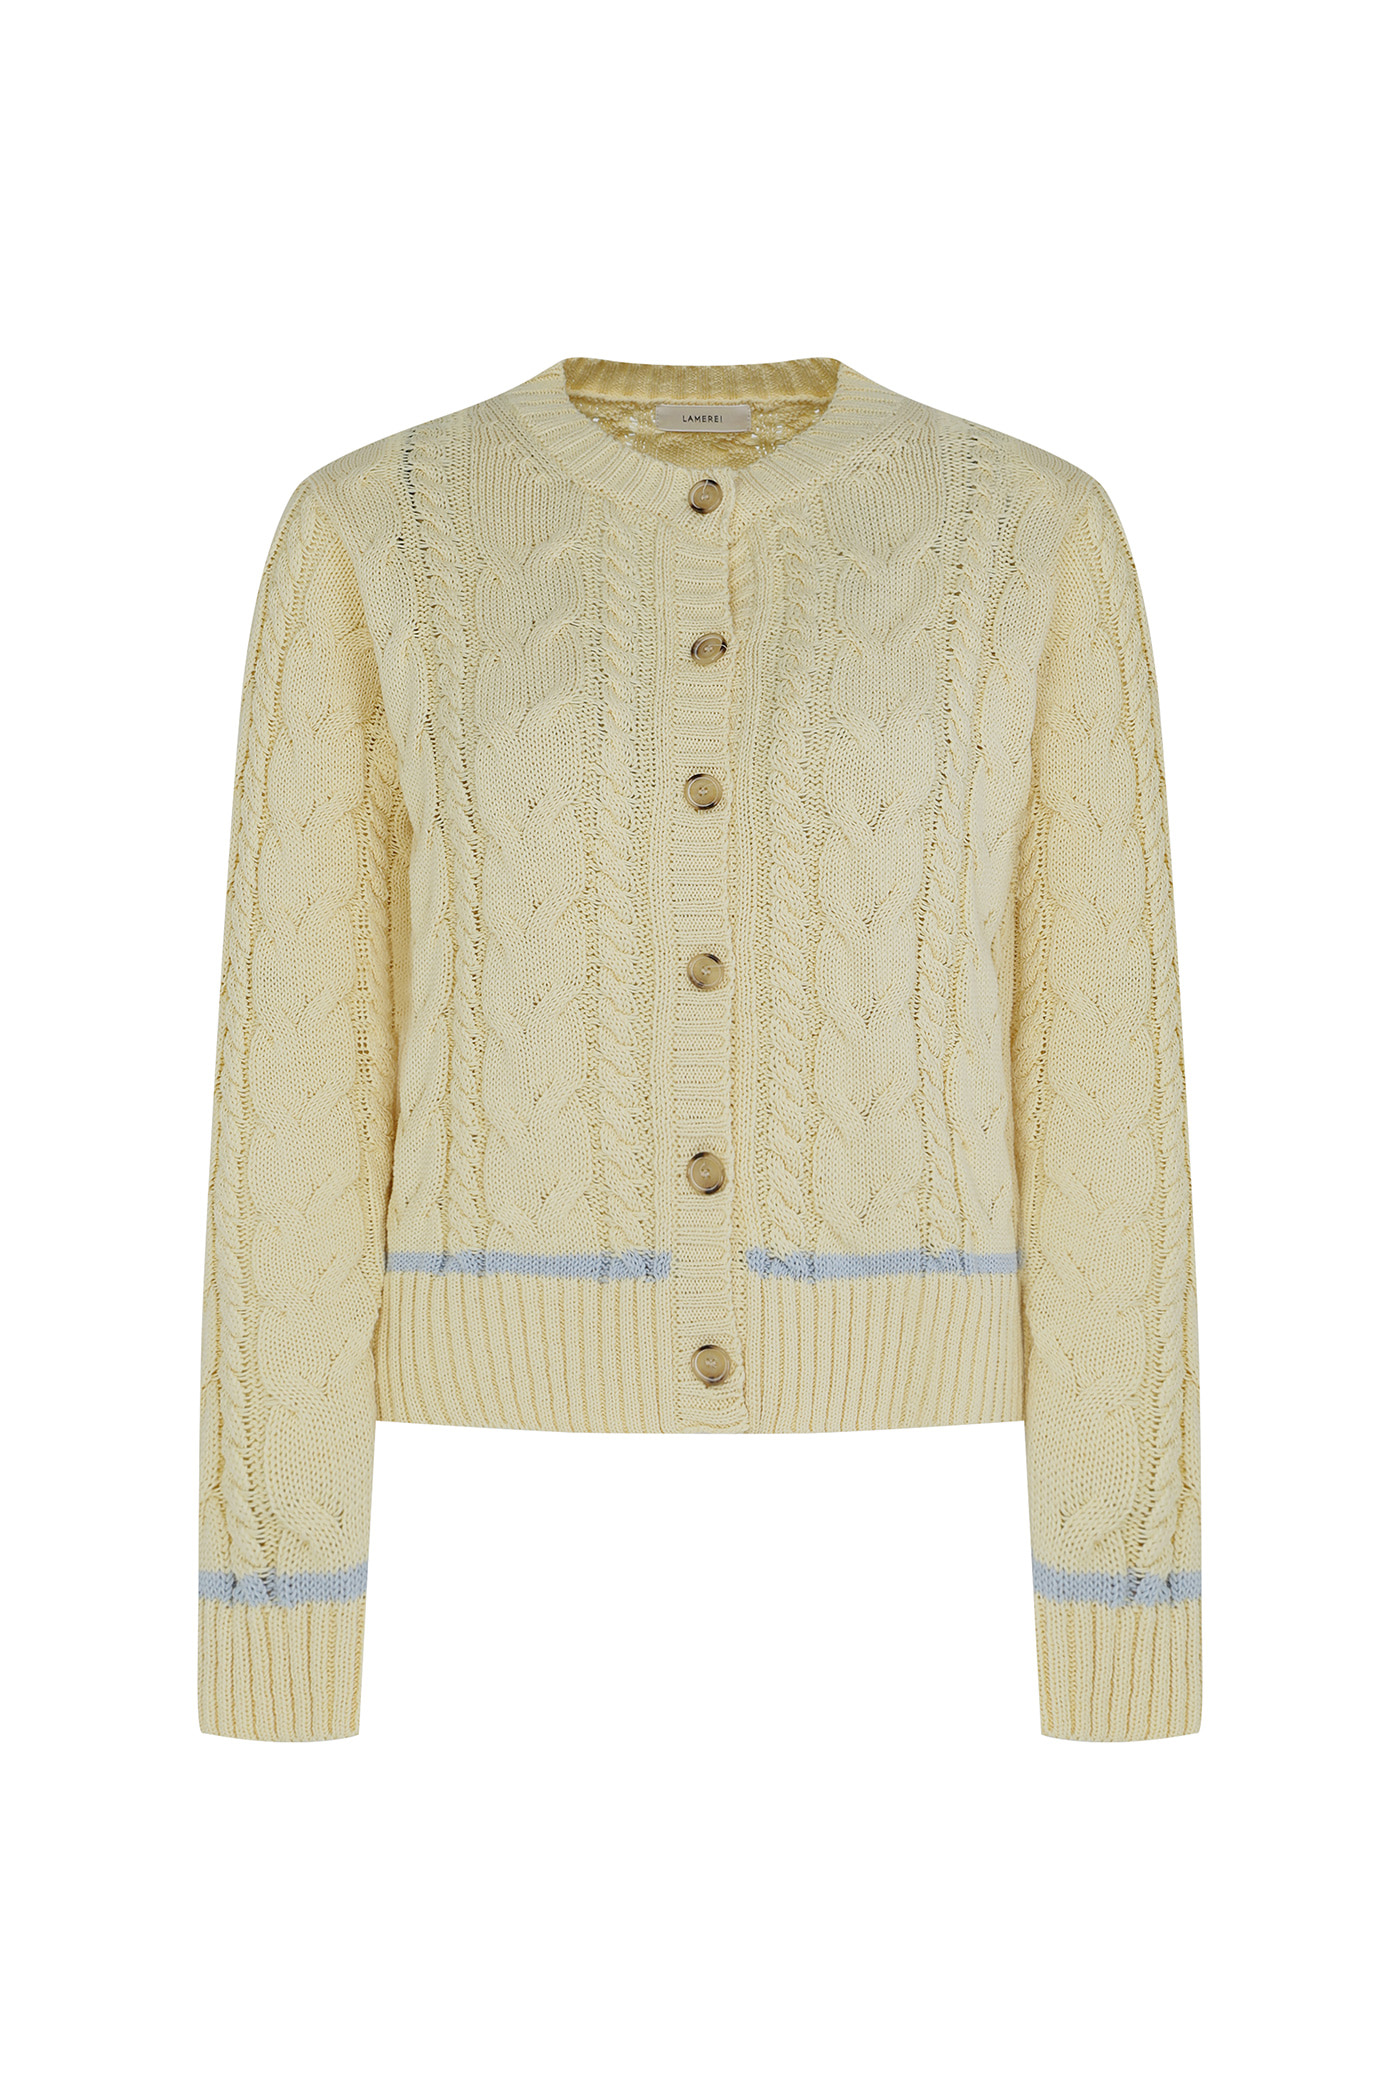 Cotton cable Cardigan-Light yellow